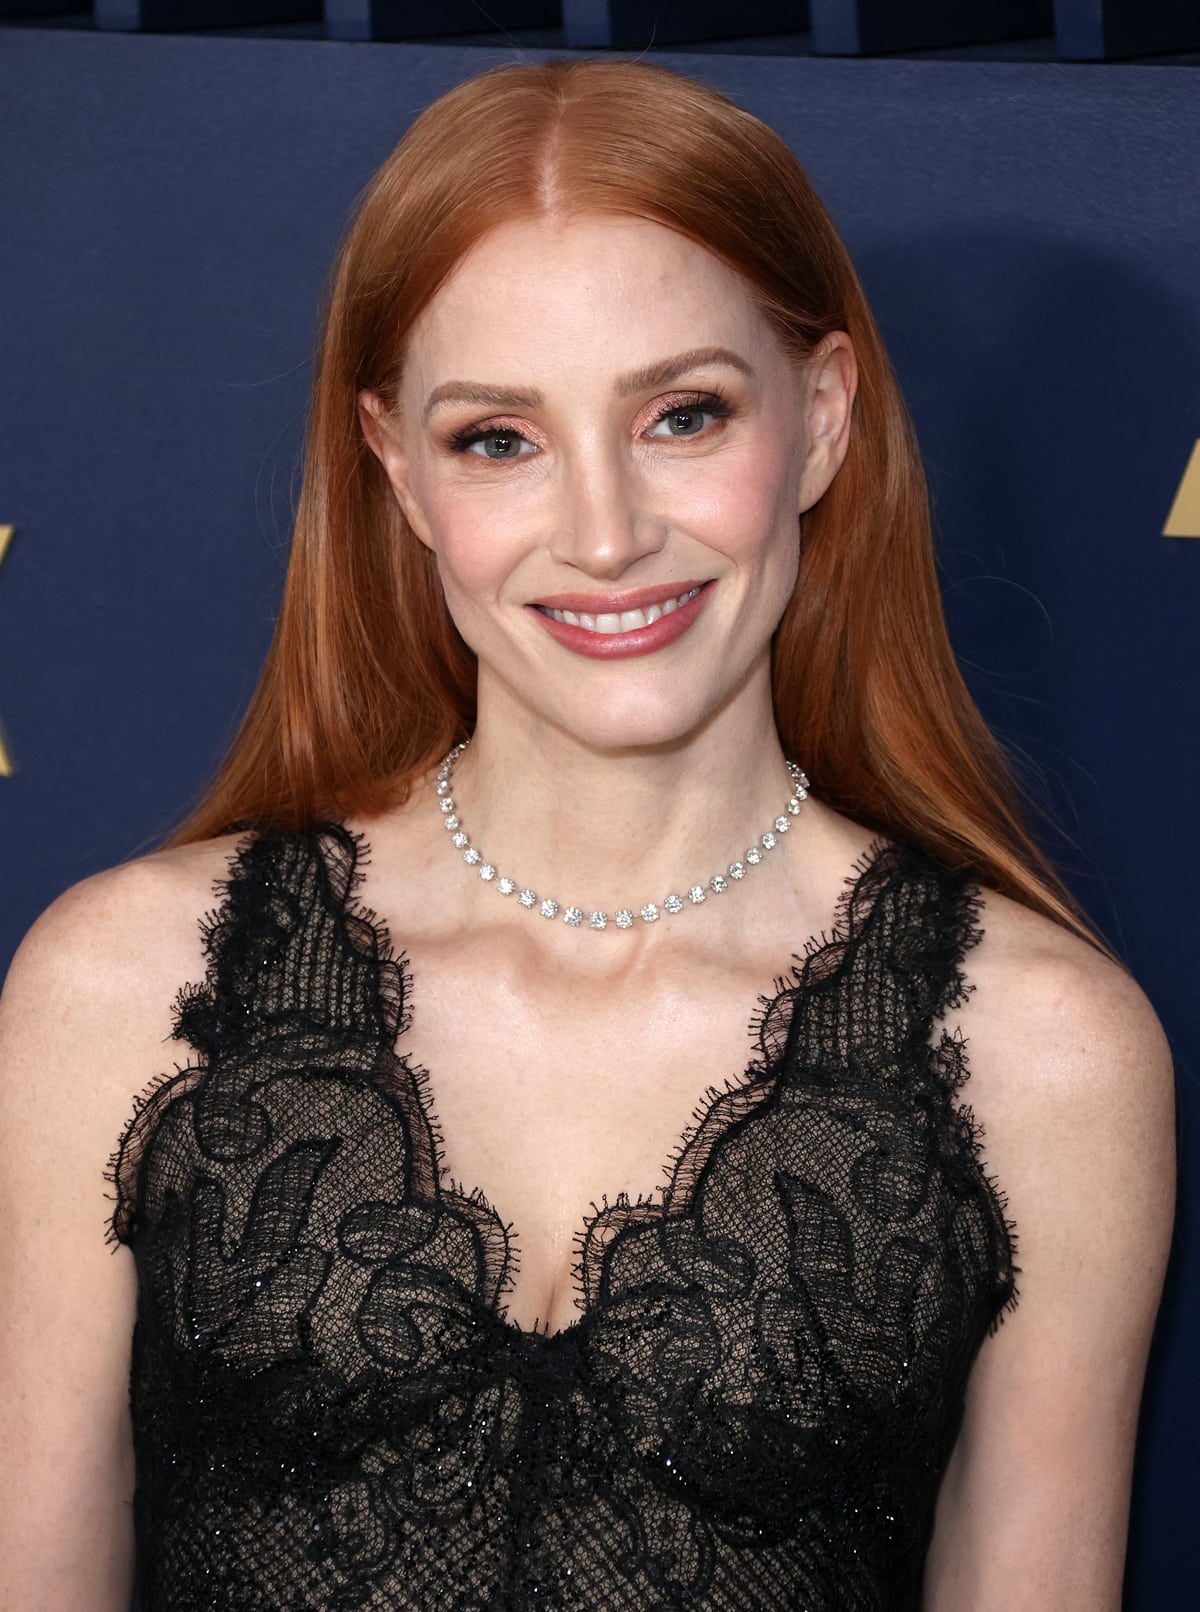 Accessorized with over 20 carats of De Beers diamonds, Chastain's makeup and hair, a polished straight style with a middle part, complement the refined aesthetic, making her appearance a highlight of the evening